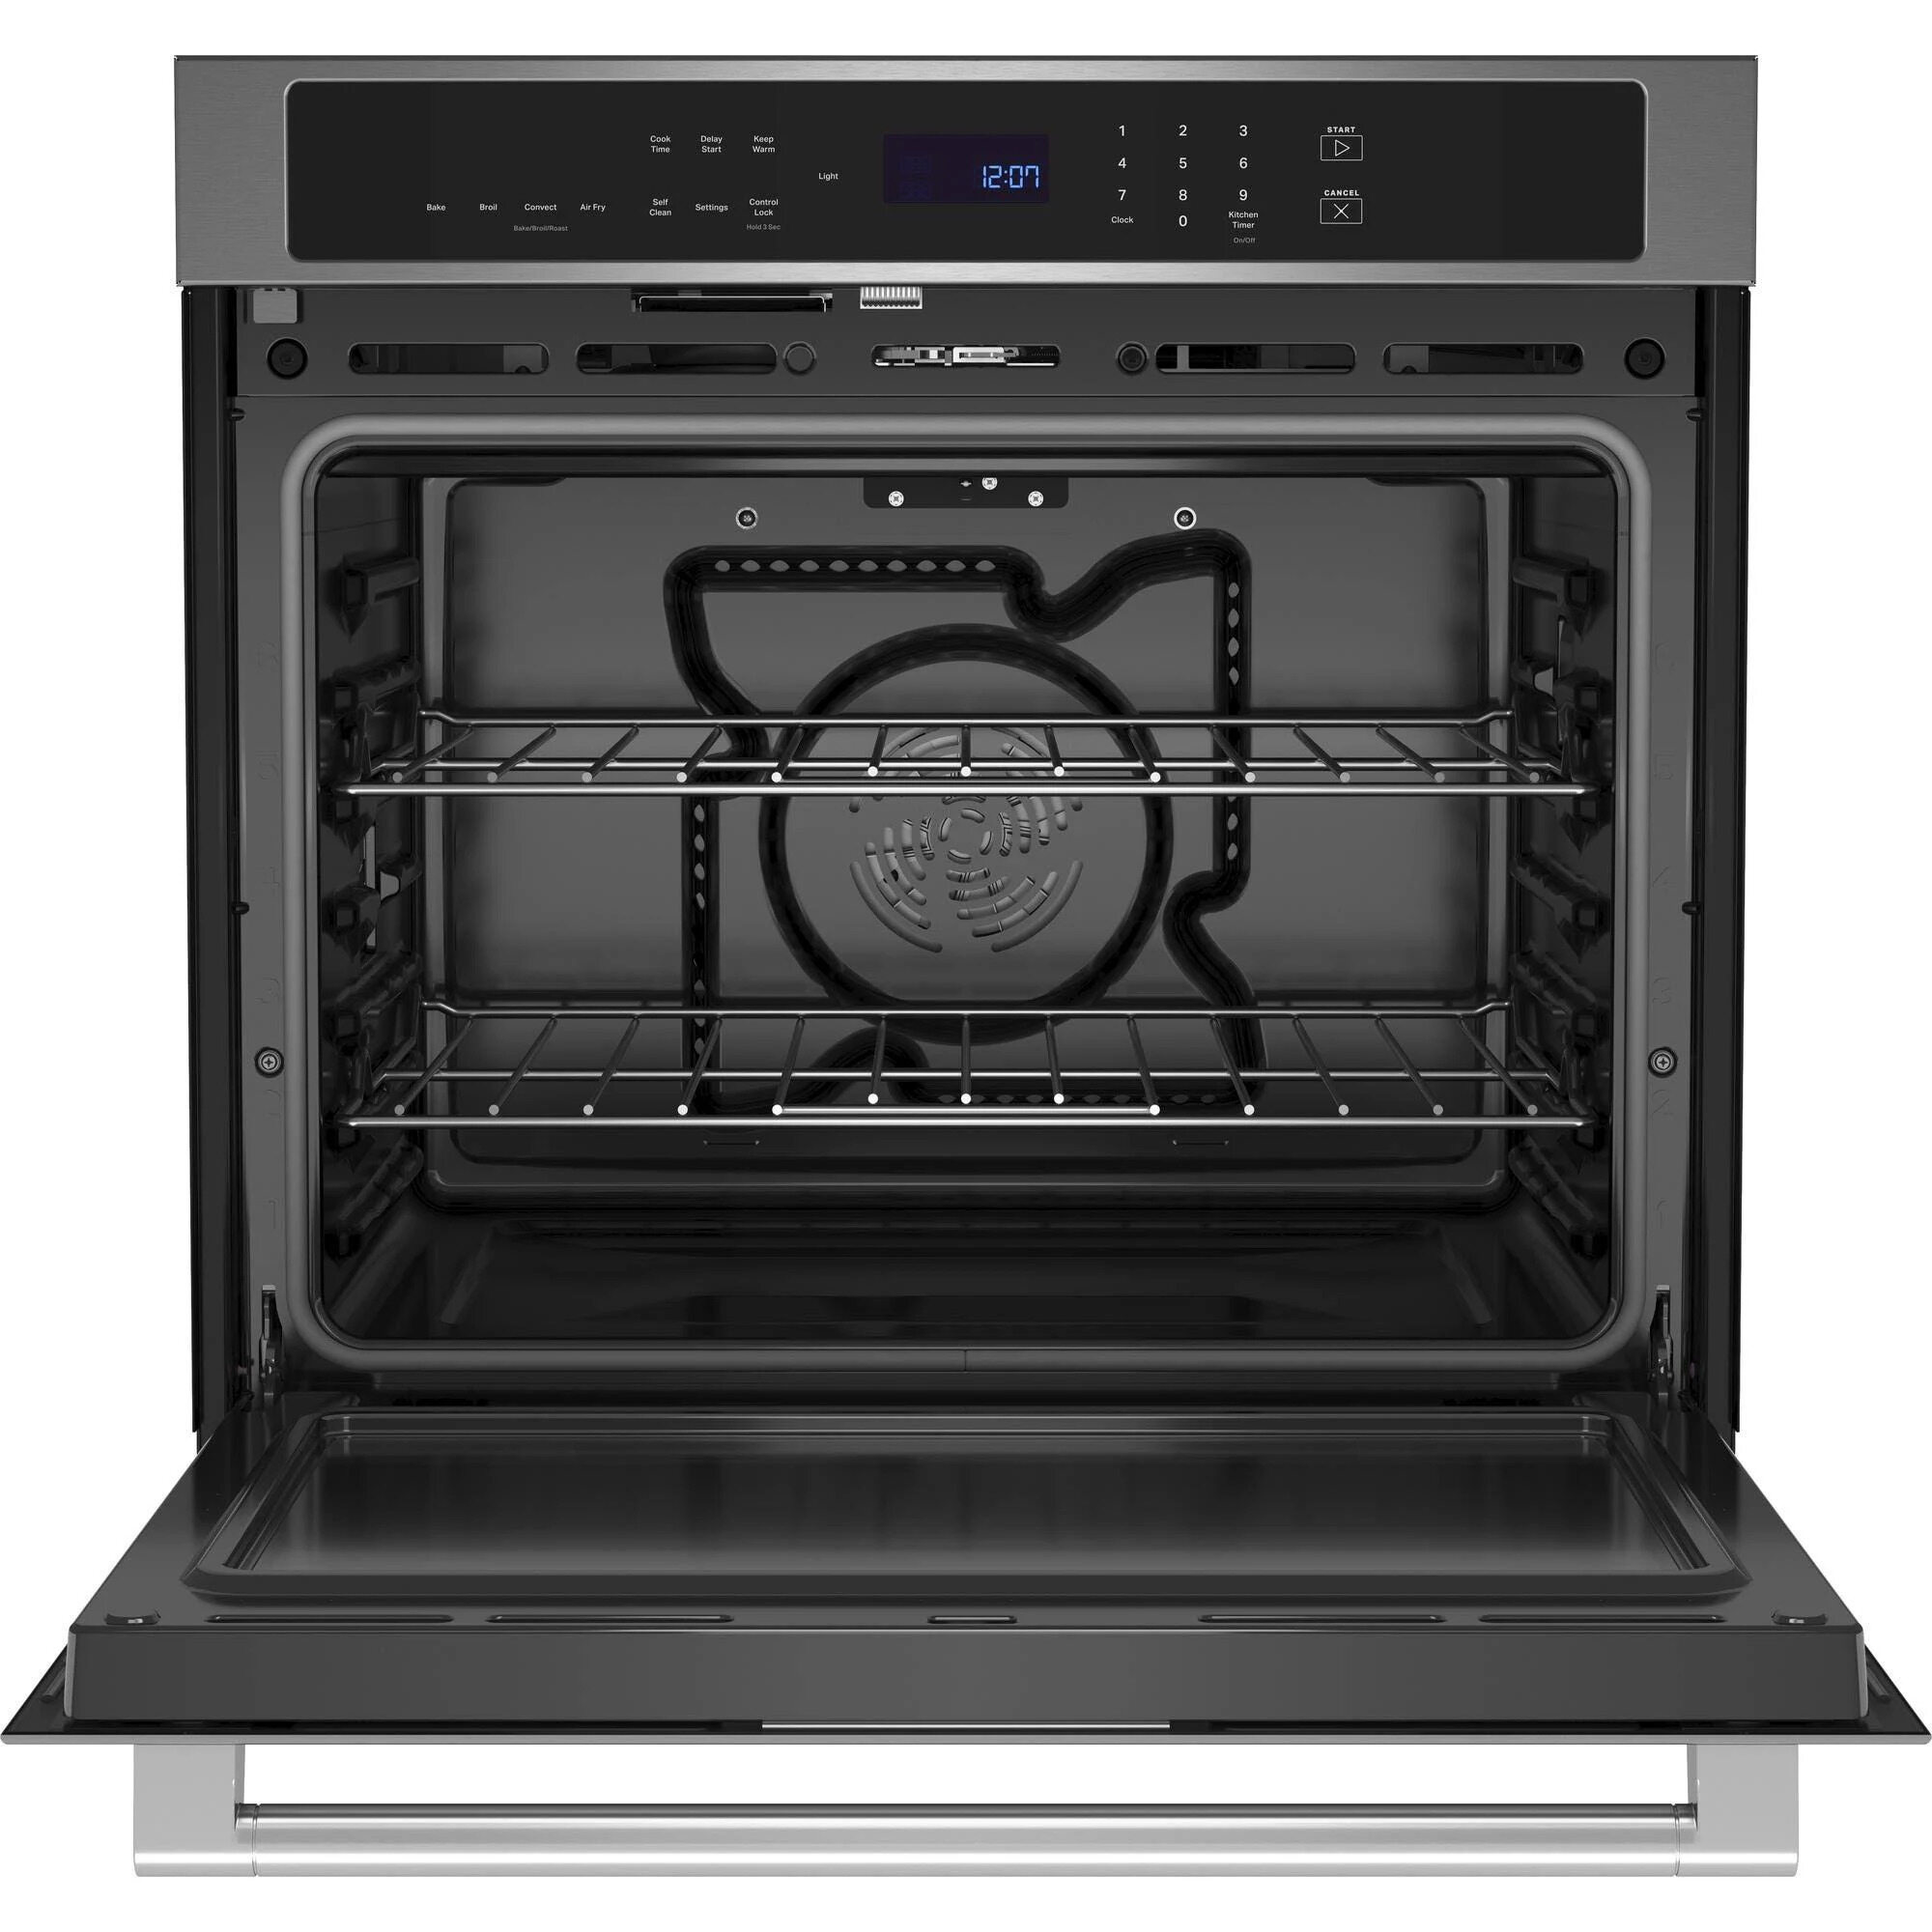 How To Fix The Error Code F0-E0 For Maytag Oven